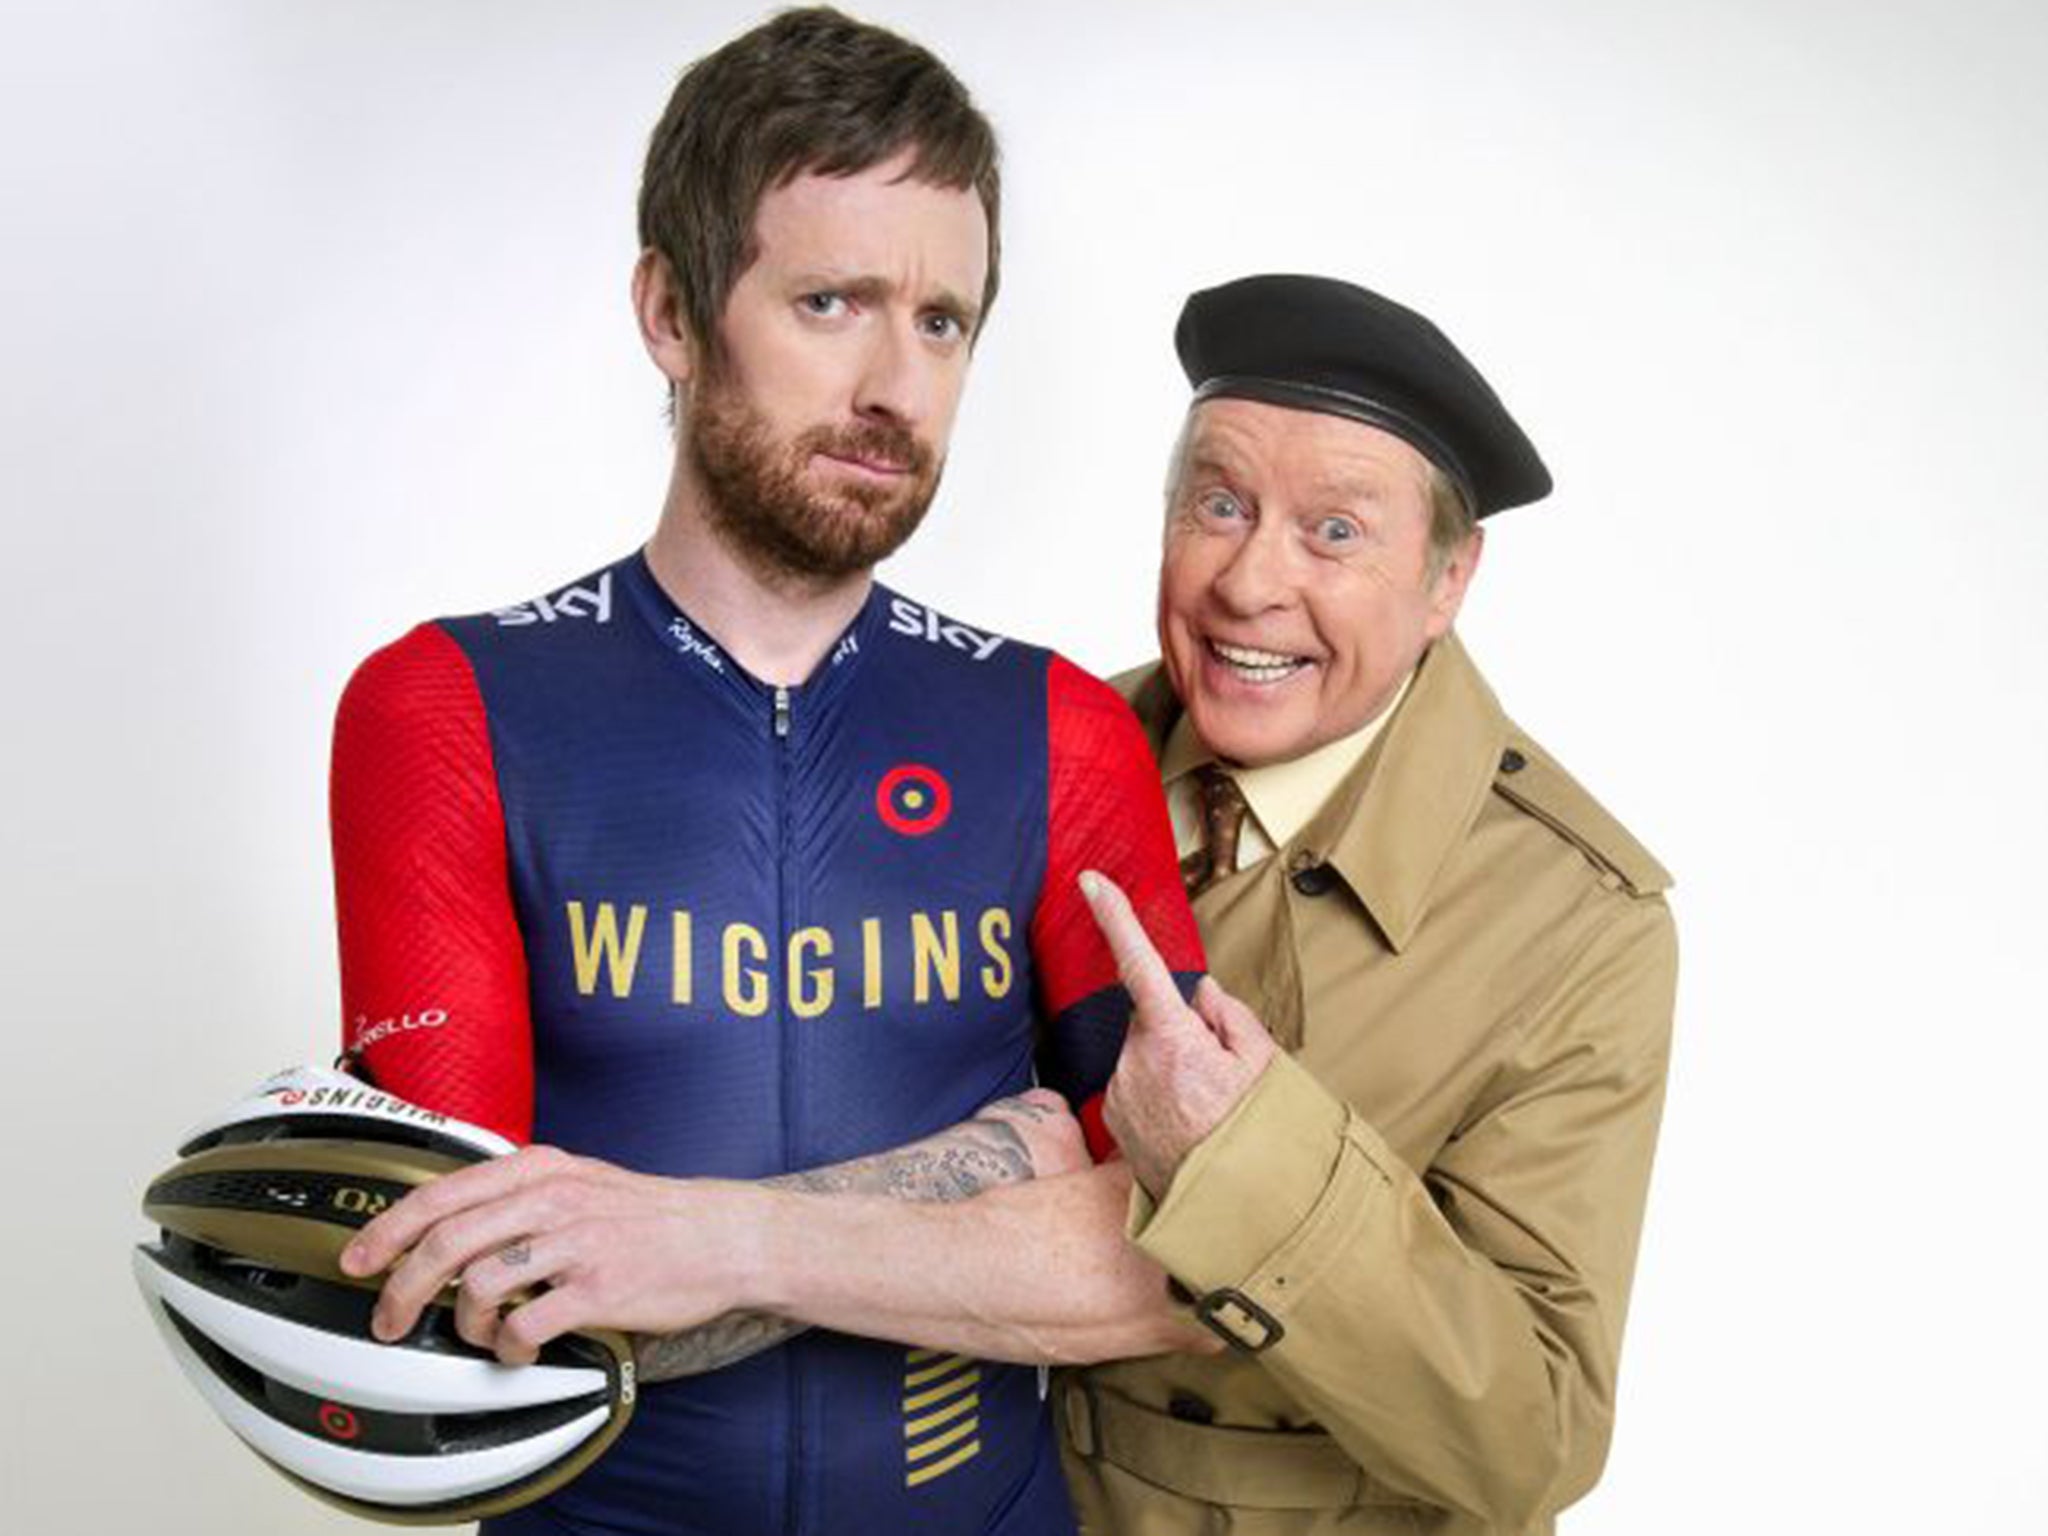 Olympic cycling champion Sir Bradley Wiggins has been roped into the proceedings